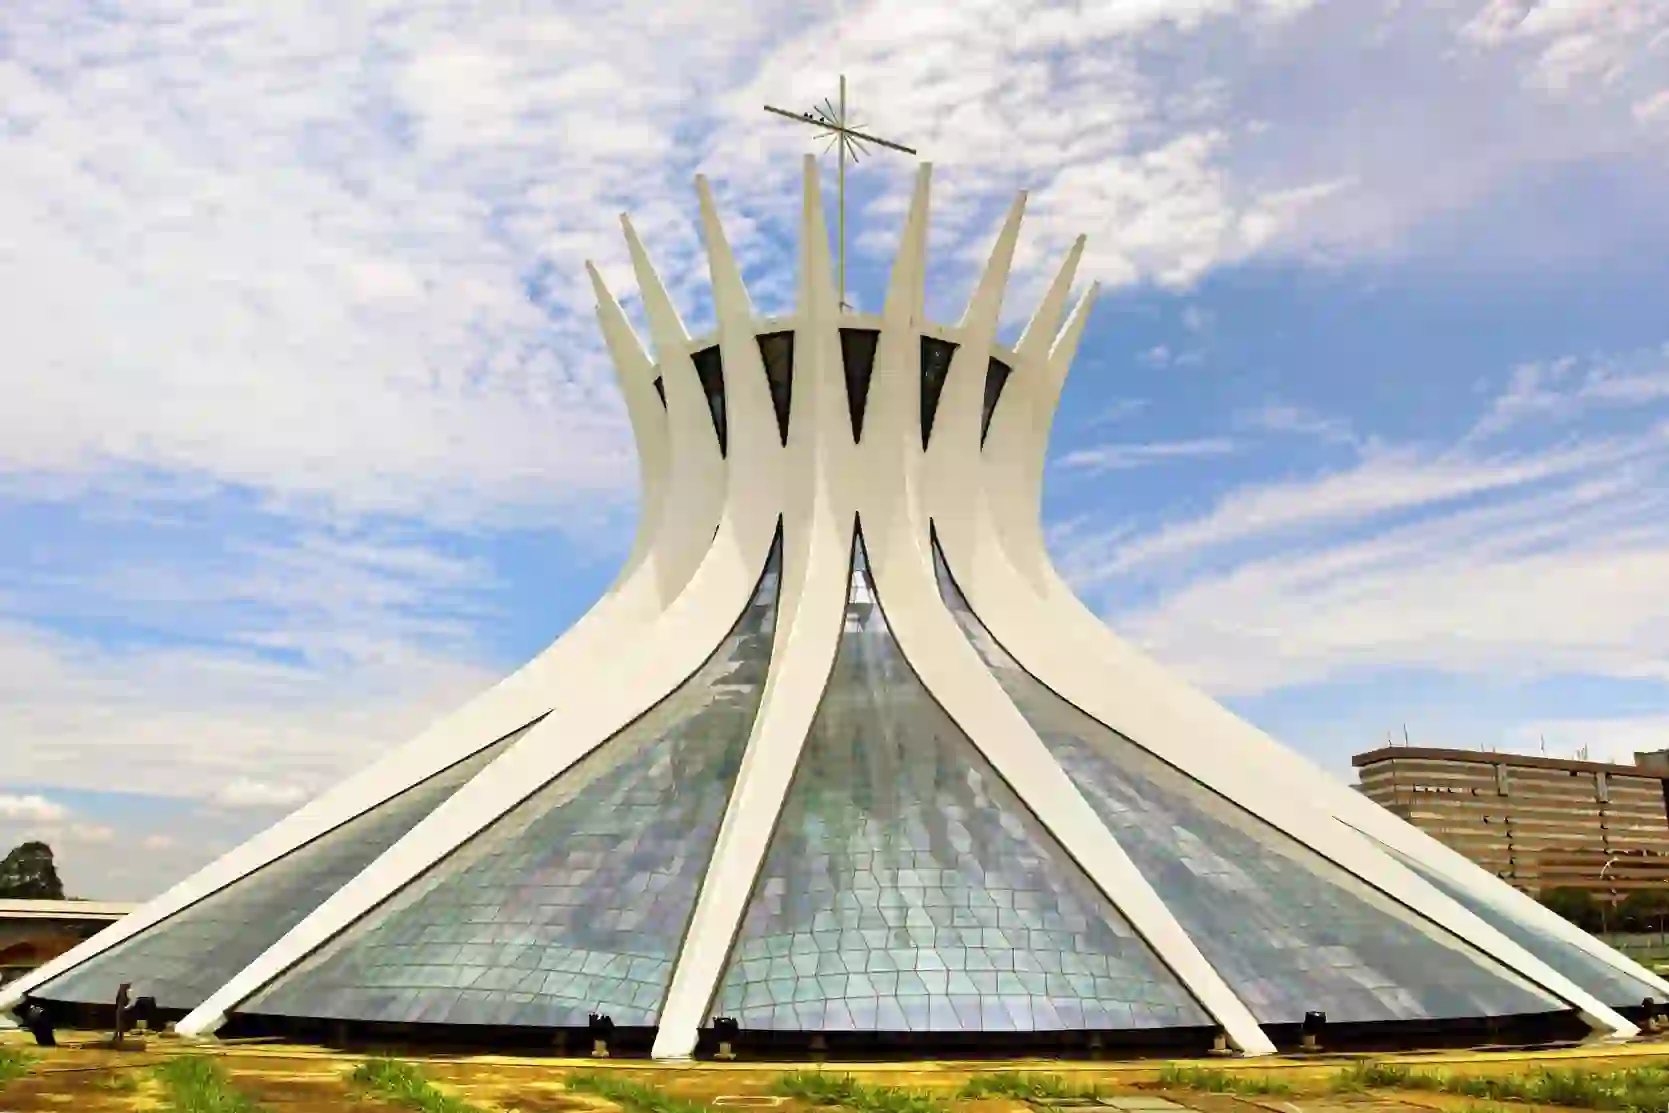 4 Days in Brasilia Trip: Budgets, Hotels, Food & Attractions 